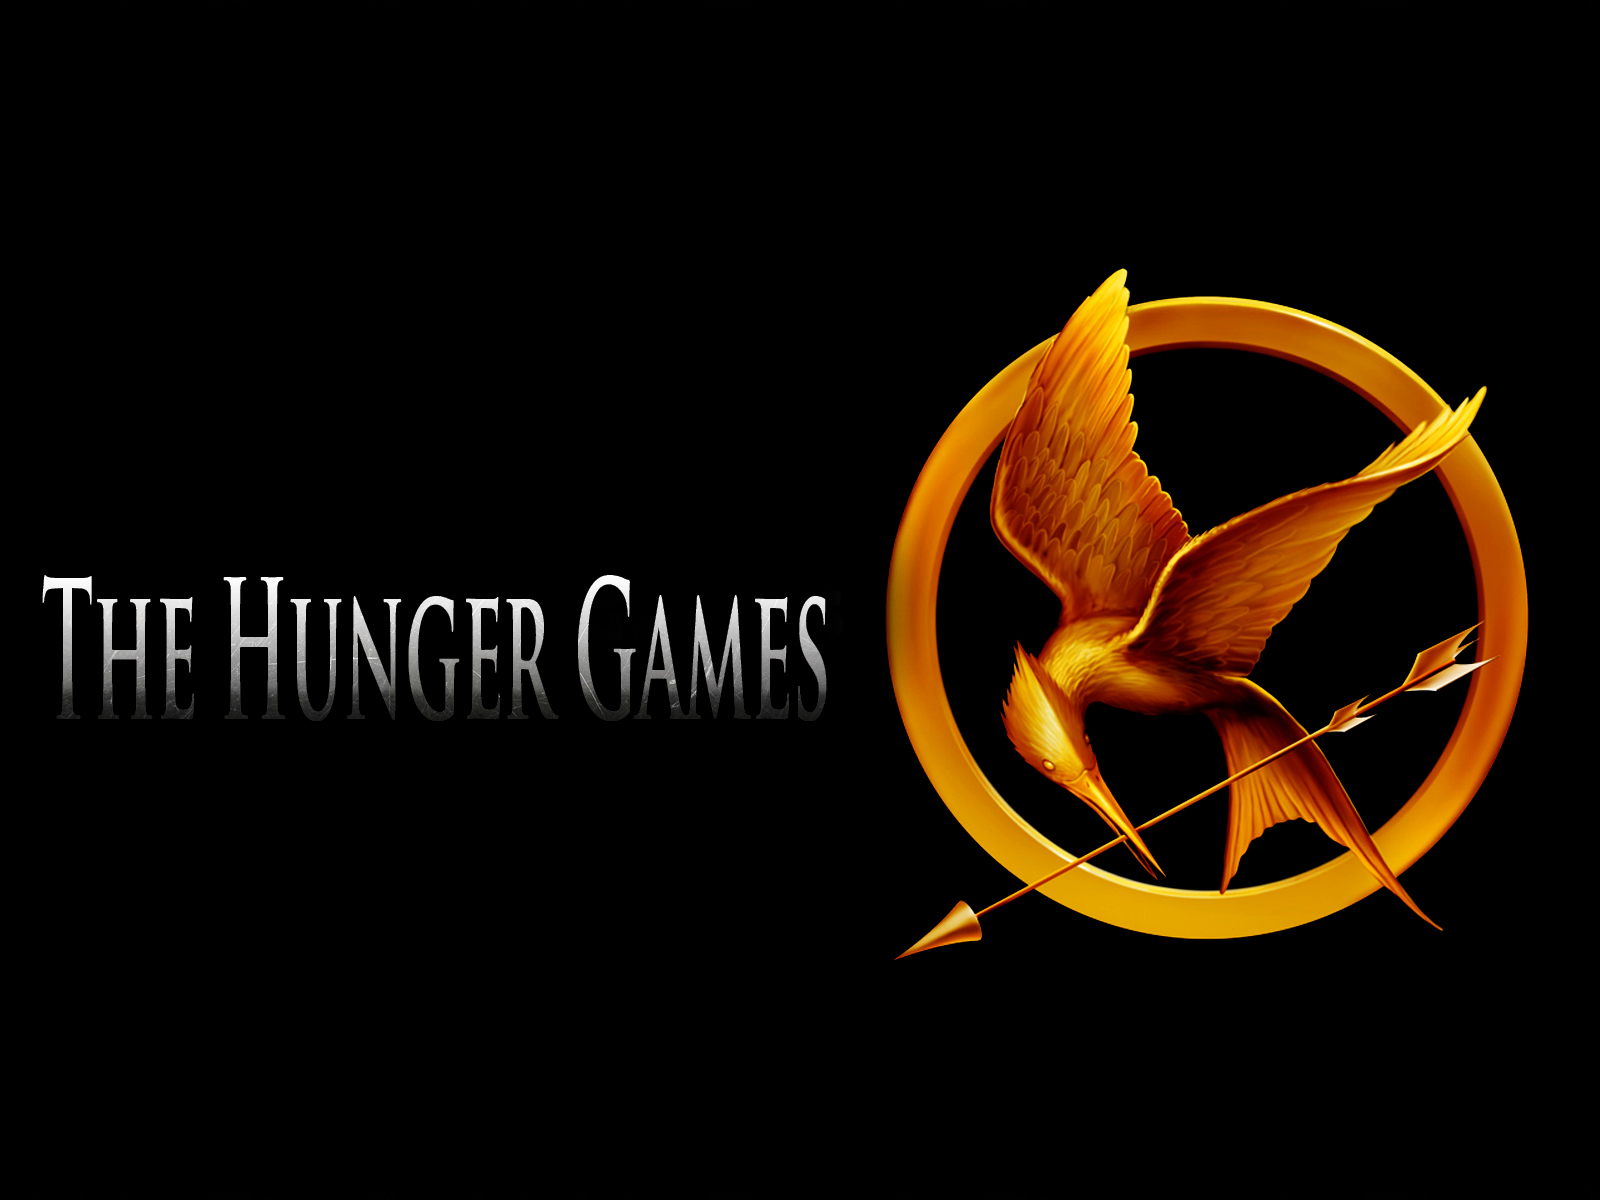  Movie The Hunger Games Posters HD Wallpapers Desktop Wallpapers